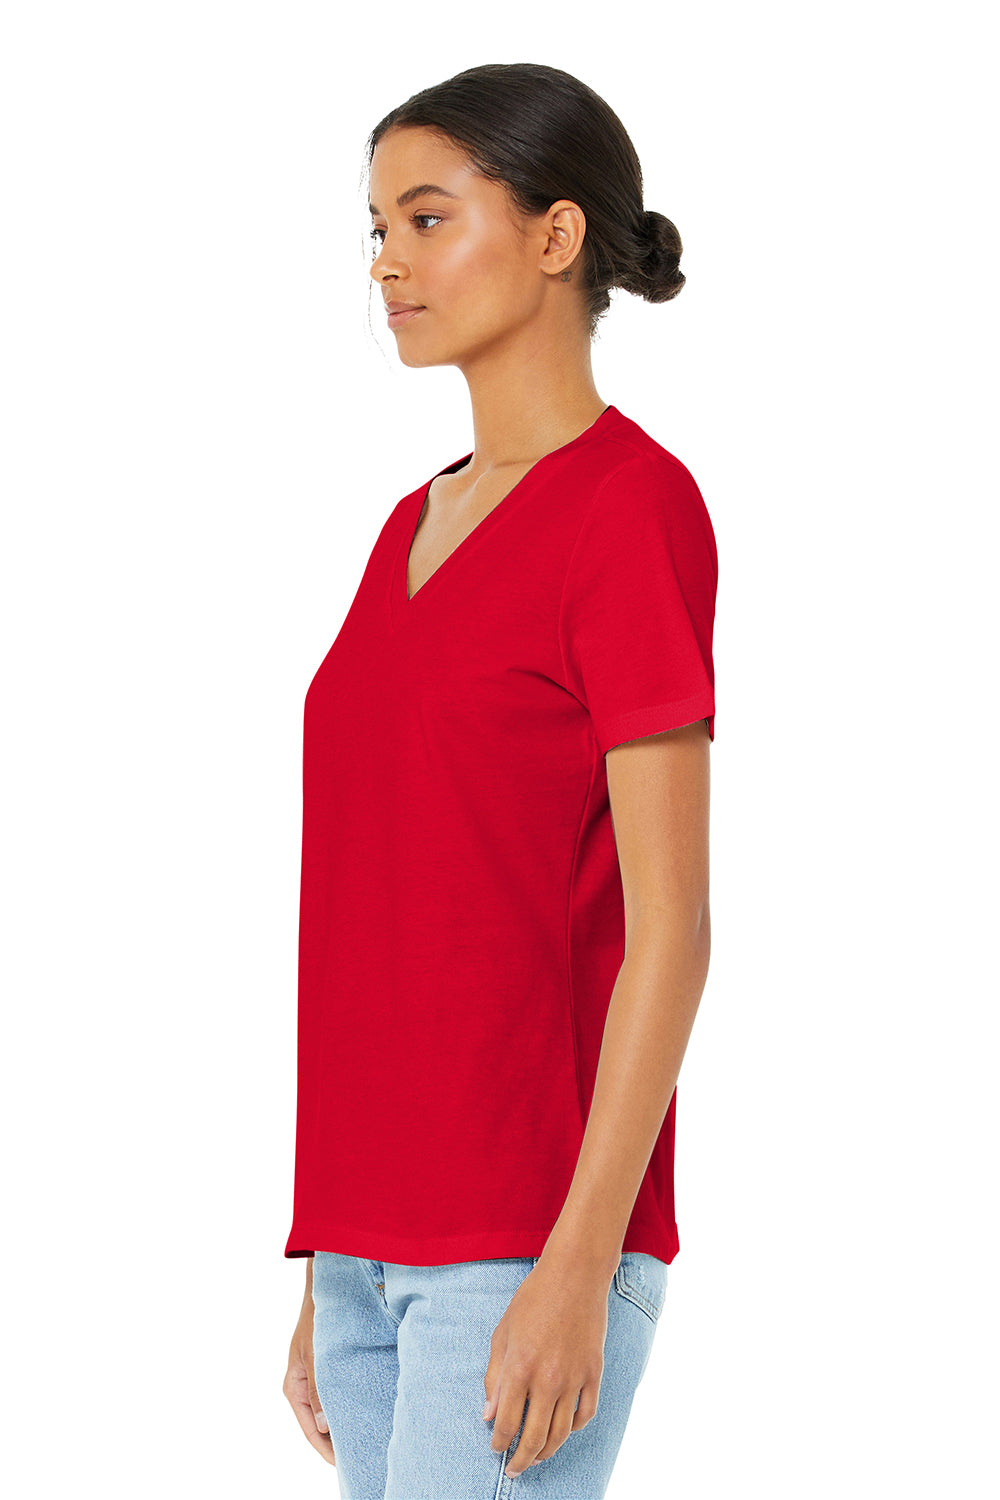 Bella + Canvas BC6405/6405 Womens Relaxed Jersey Short Sleeve V-Neck T-Shirt Red Model 3Q